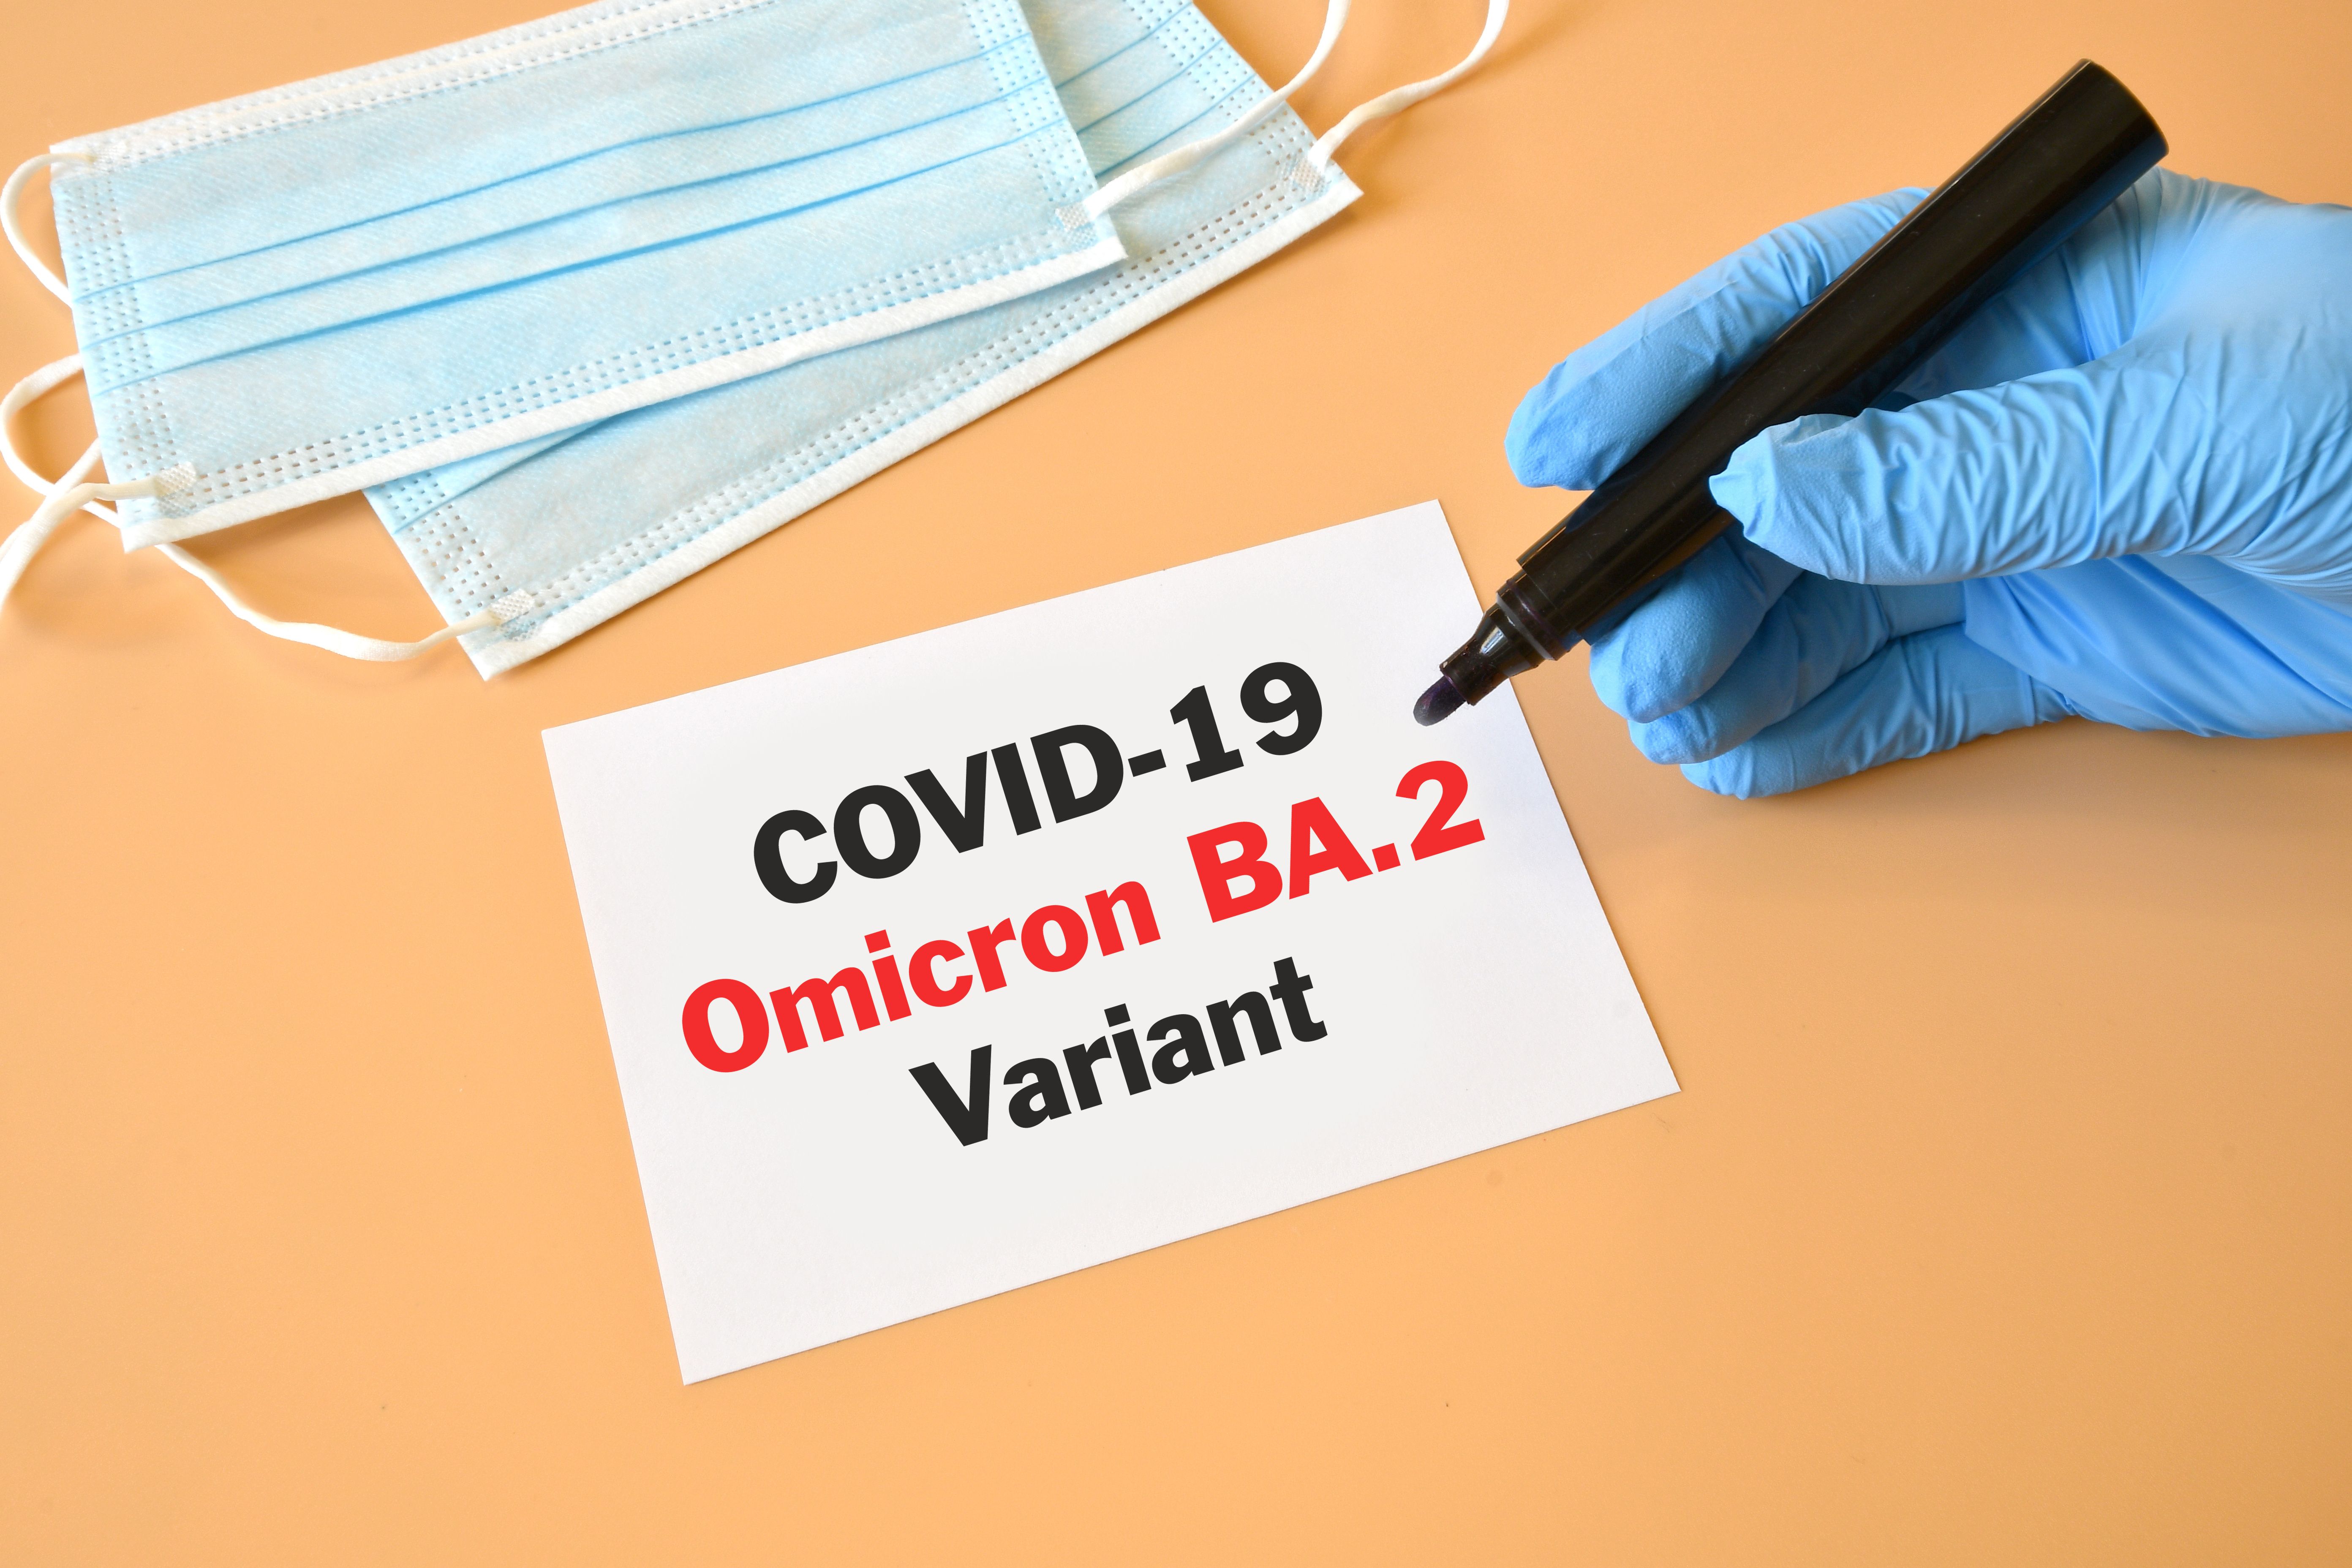 There are many unknowns about the BA.2 COVID-19 variant. It appears 50-60% more transmissible than the original Omicron variant, but health experts are mixed on whether cases will spike dramatically.